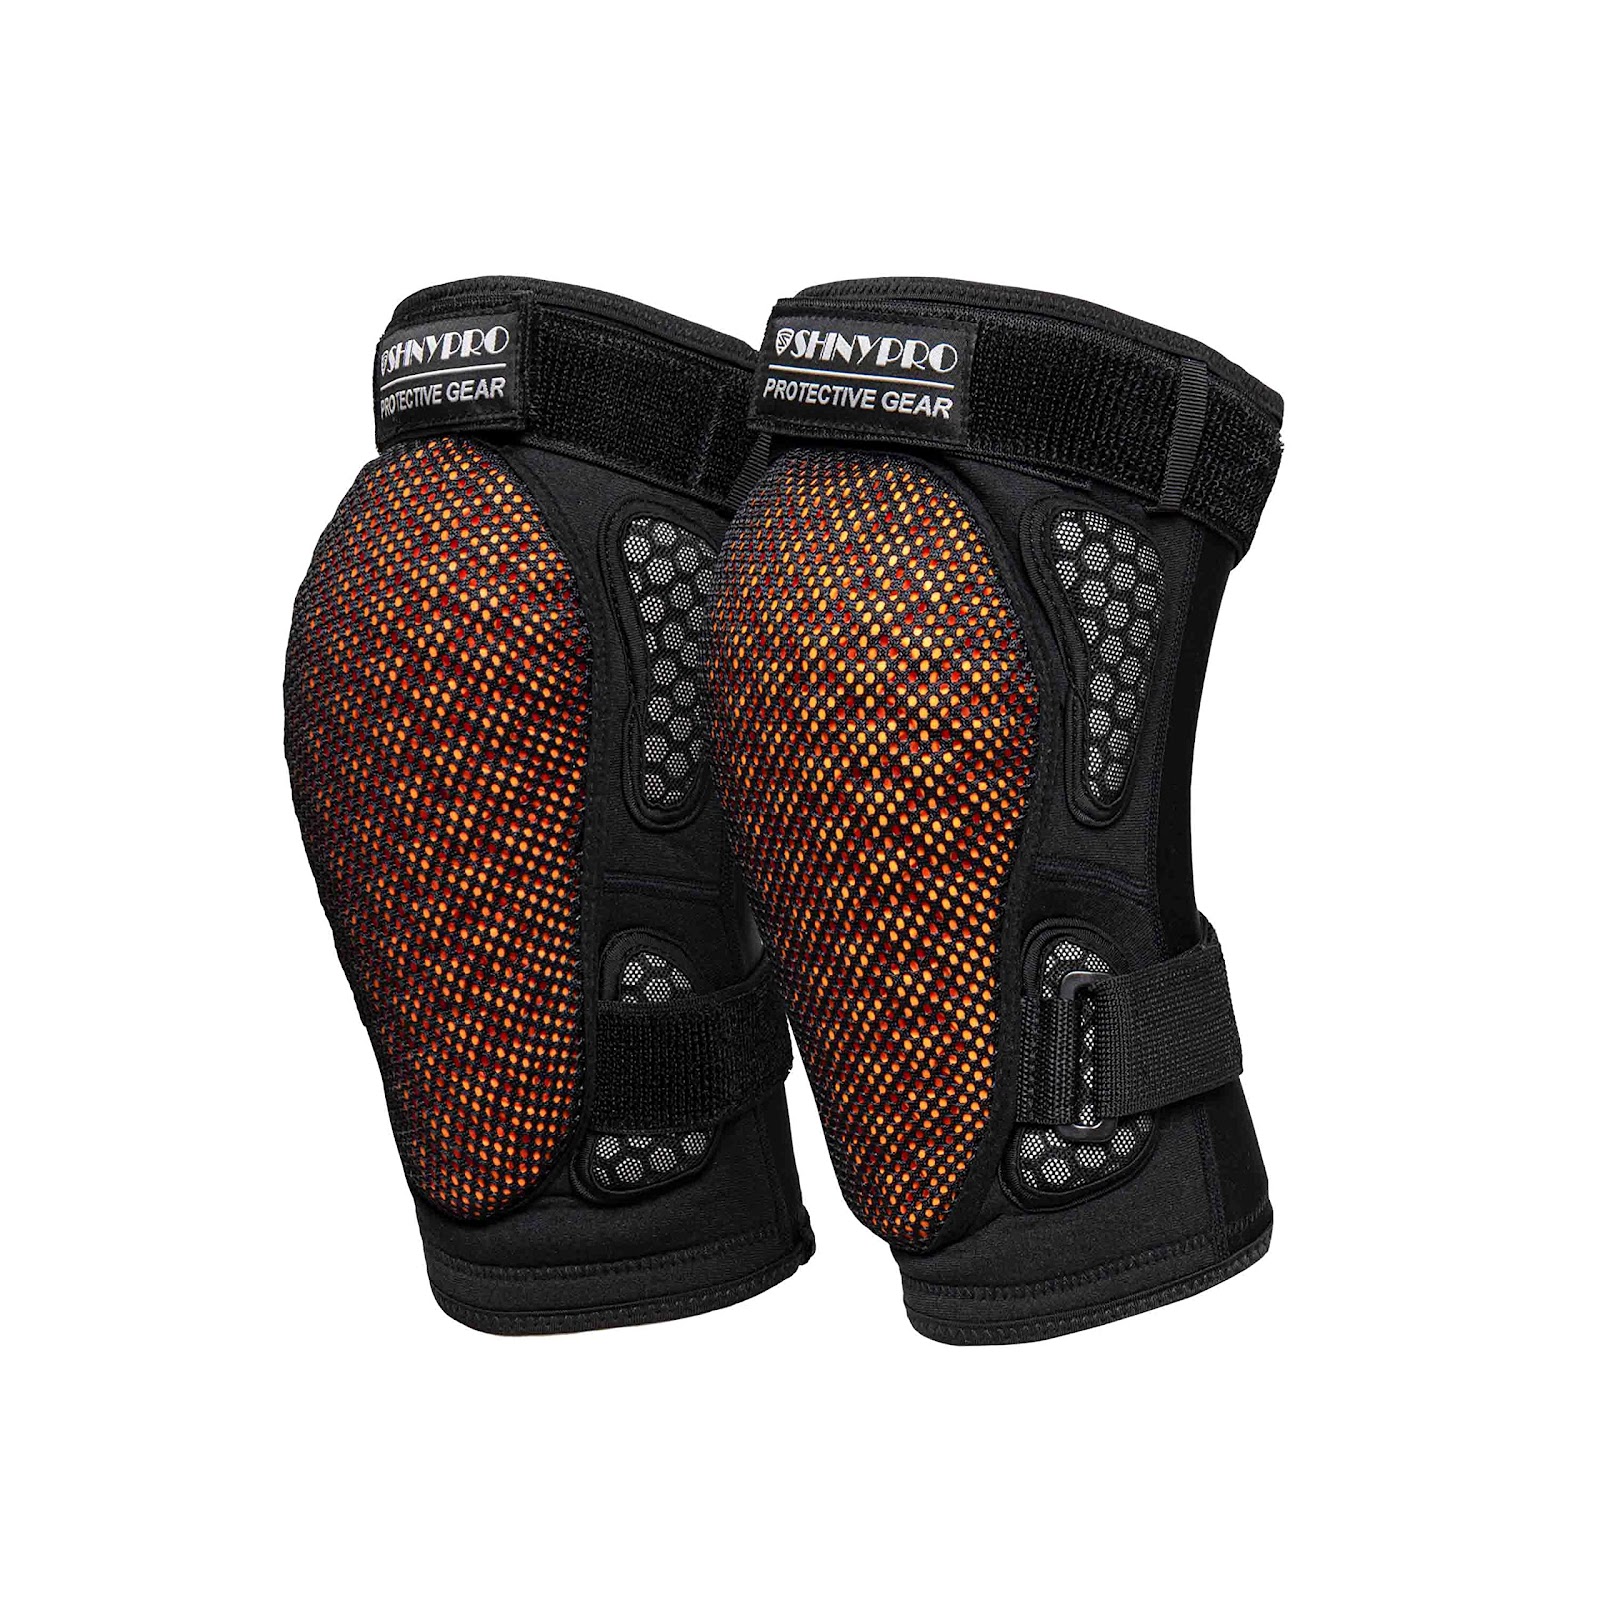 Knee pads like these that have padding rather than a hard shell do not offer as much protection, but they may be more comfortable to wear.